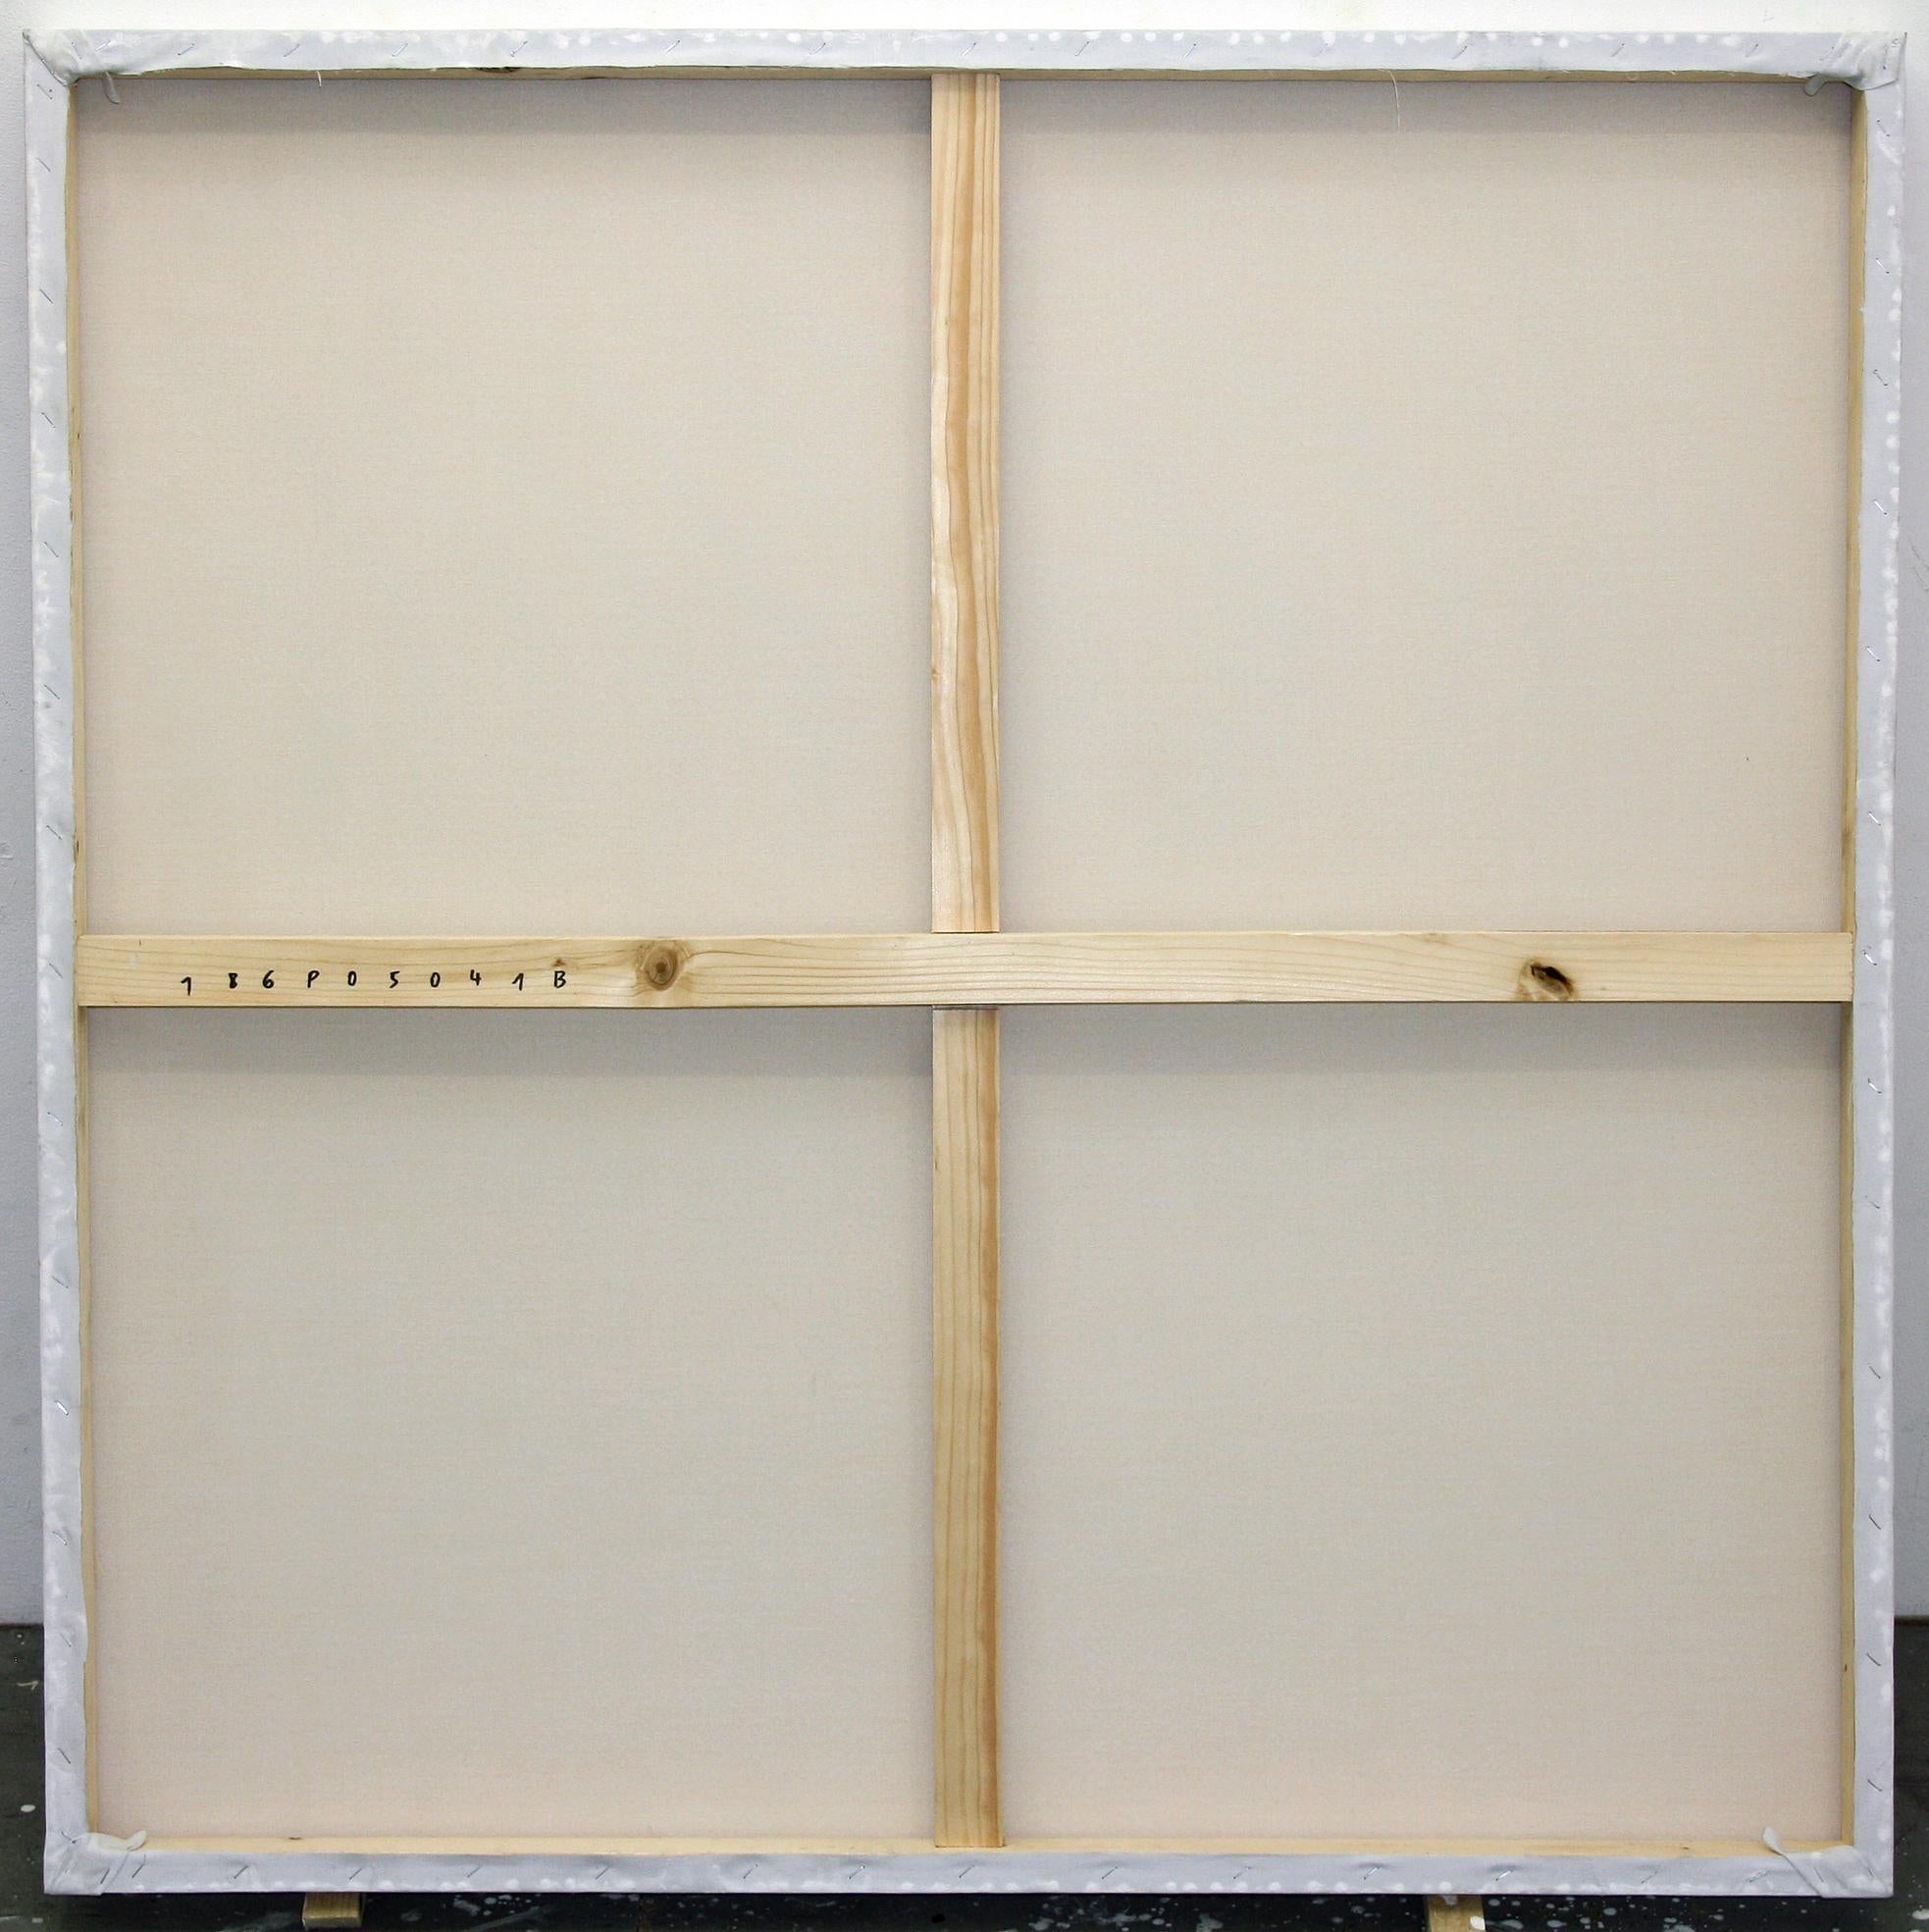 Acrylic on wood panel - Unframed

Made of 2 elements, each element dimensions are 113 x 113 cm/44.5 x 44.5 inches.

Pierre Muckensturm has long been interested in the relationship between image and emptiness, which to him represents energy and